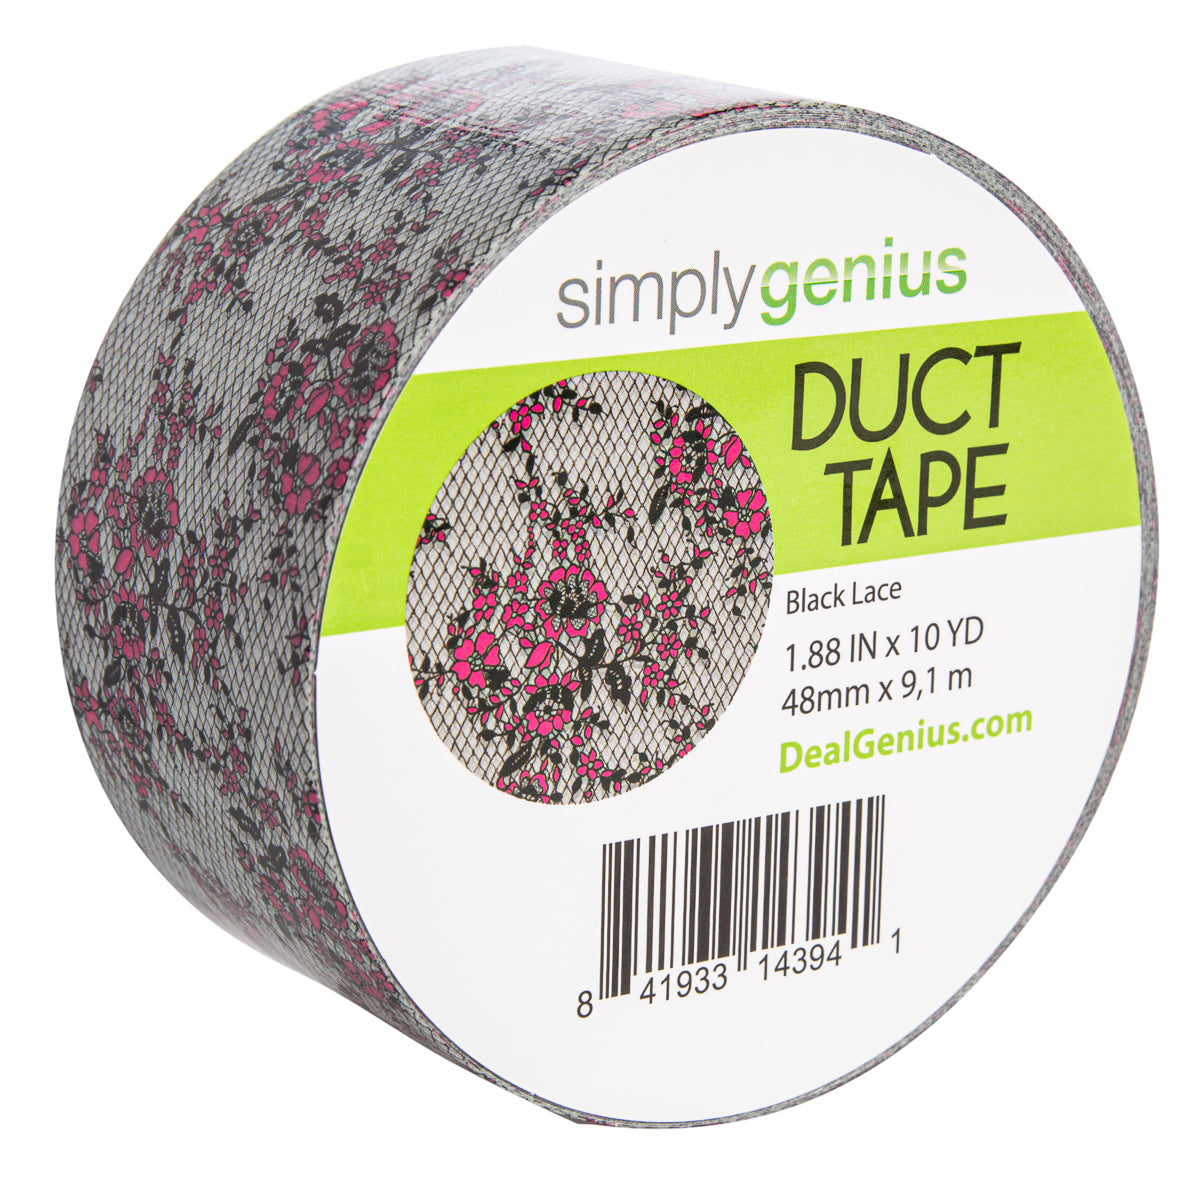 Take a look at our - Platypus Designer Duct Tape by Fortis